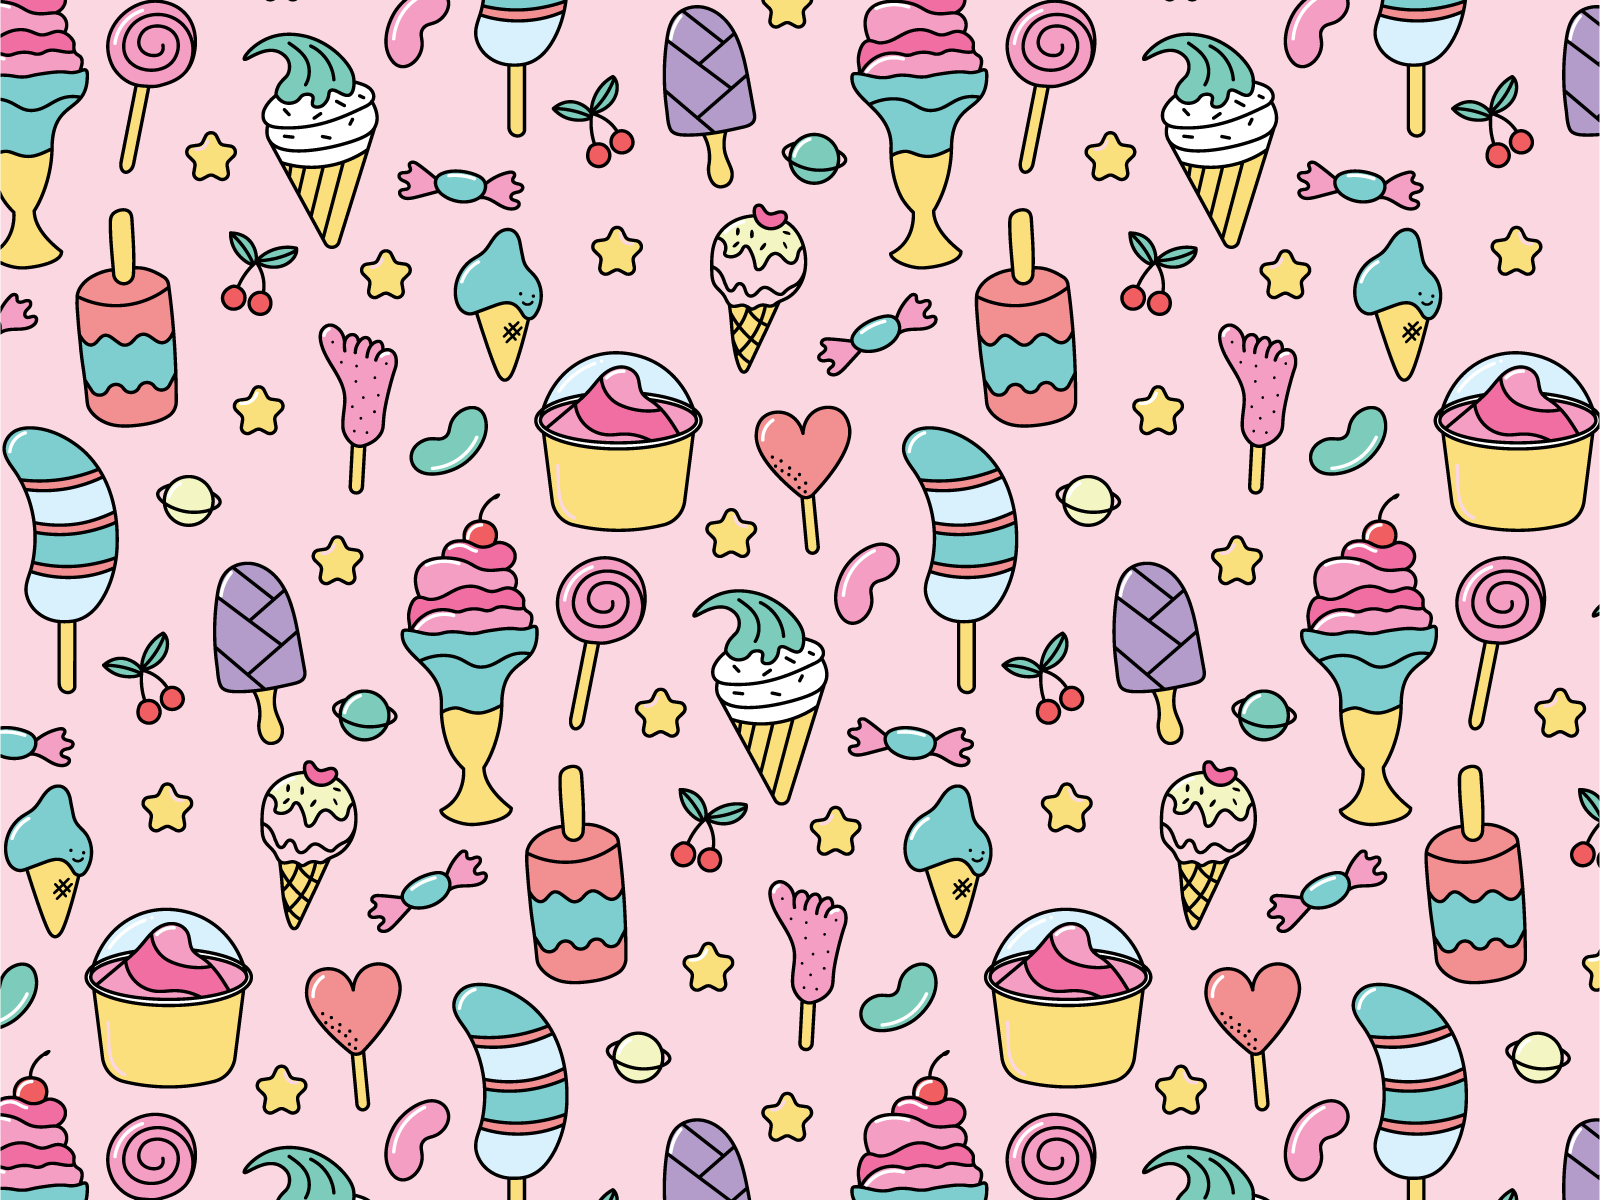 Seriously delicious ice cream pattern by Pattern idol on Dribbble